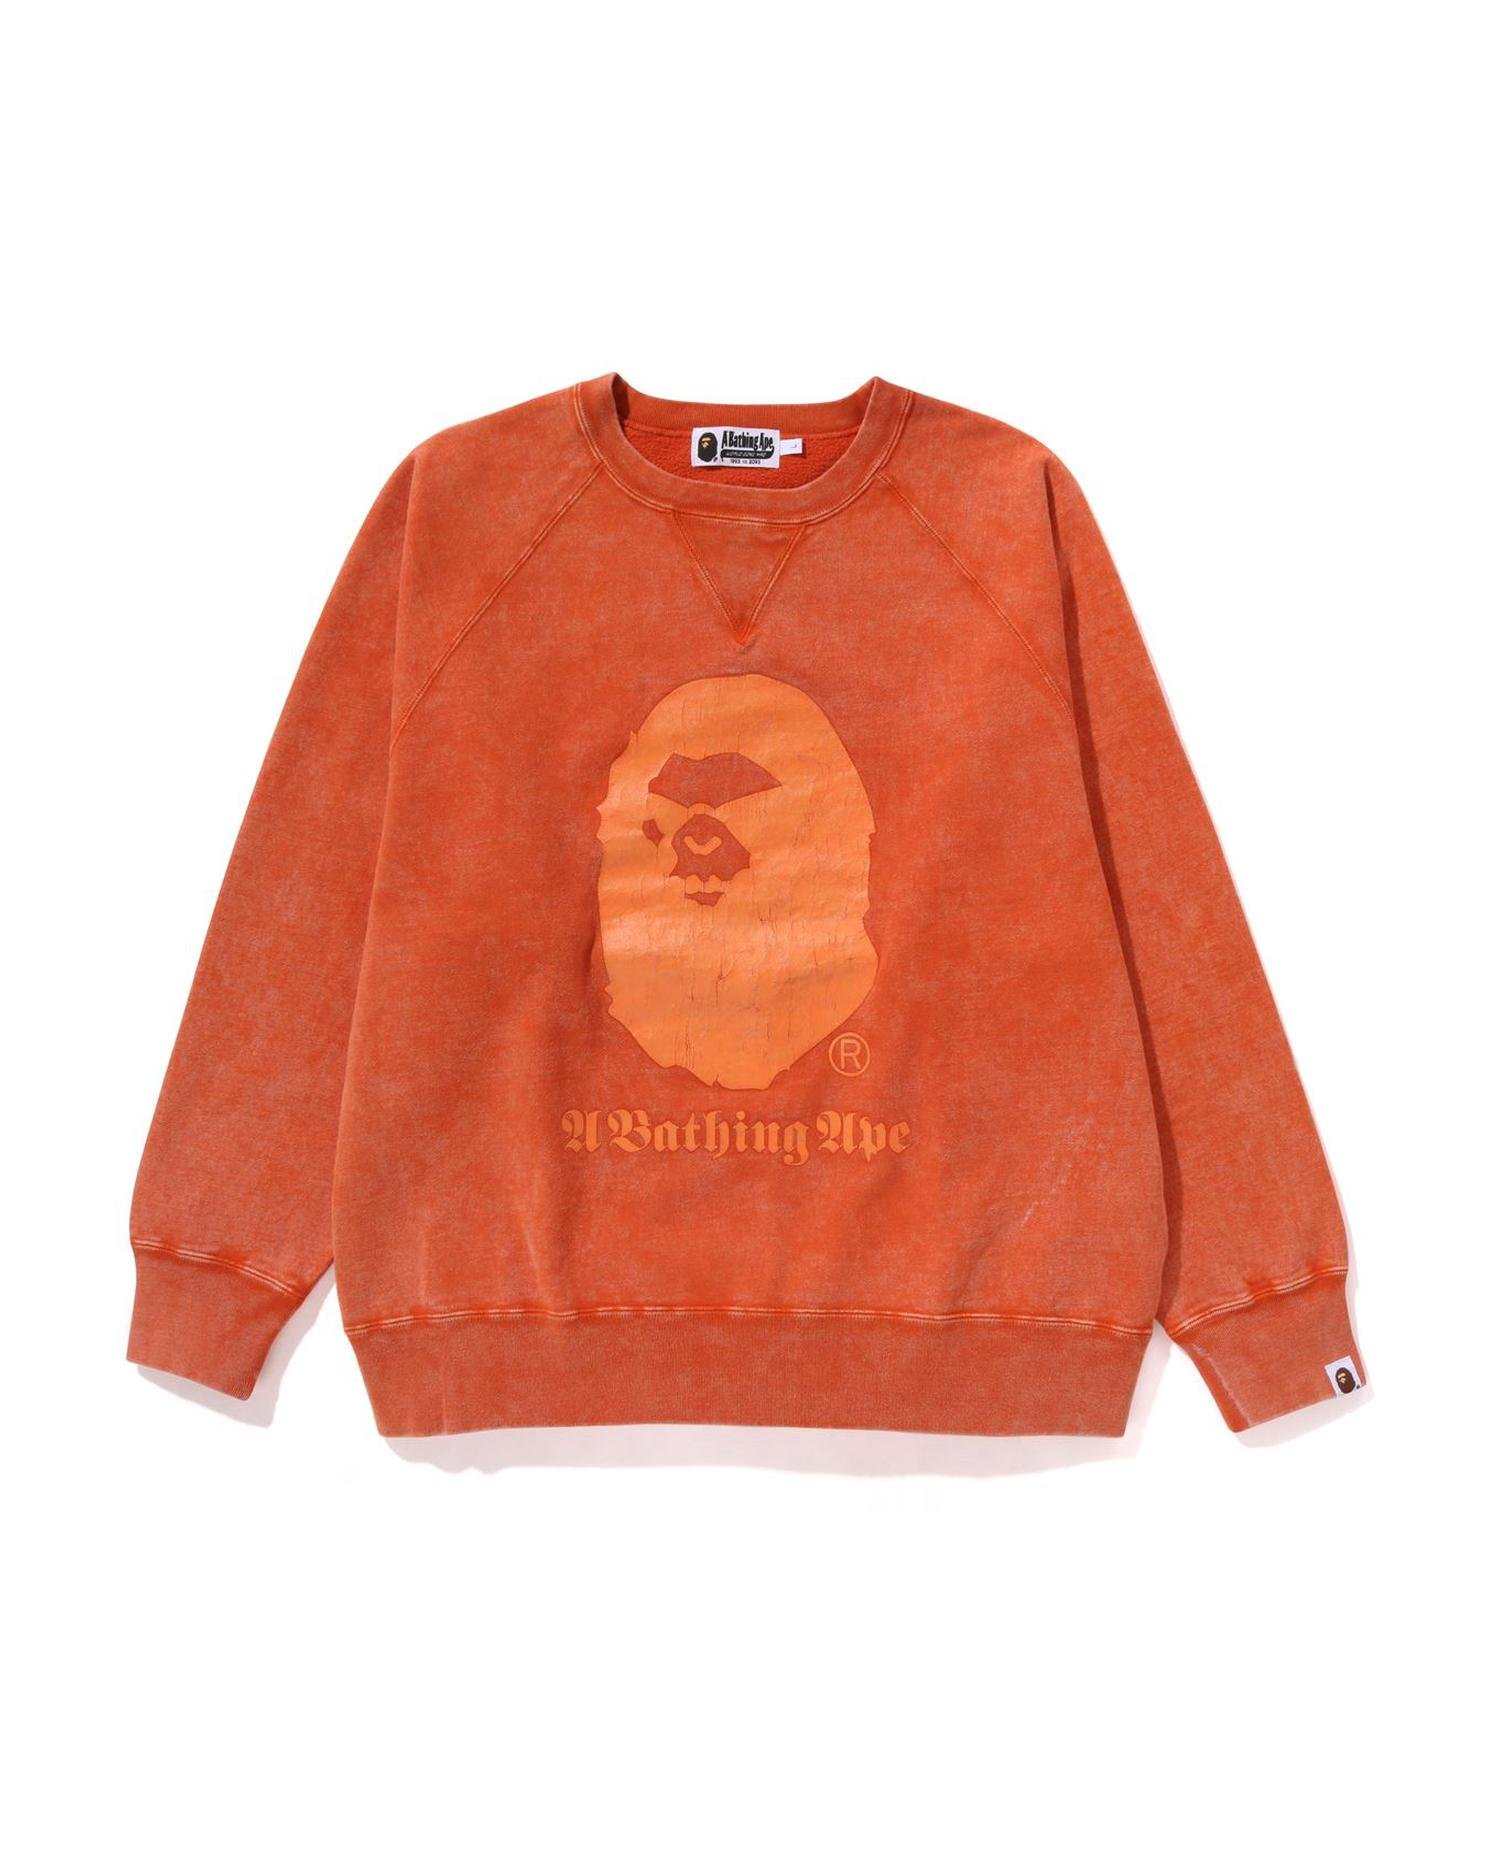 A Bathing Ape Overdye Relaxed Fit Crewneck by BAPE